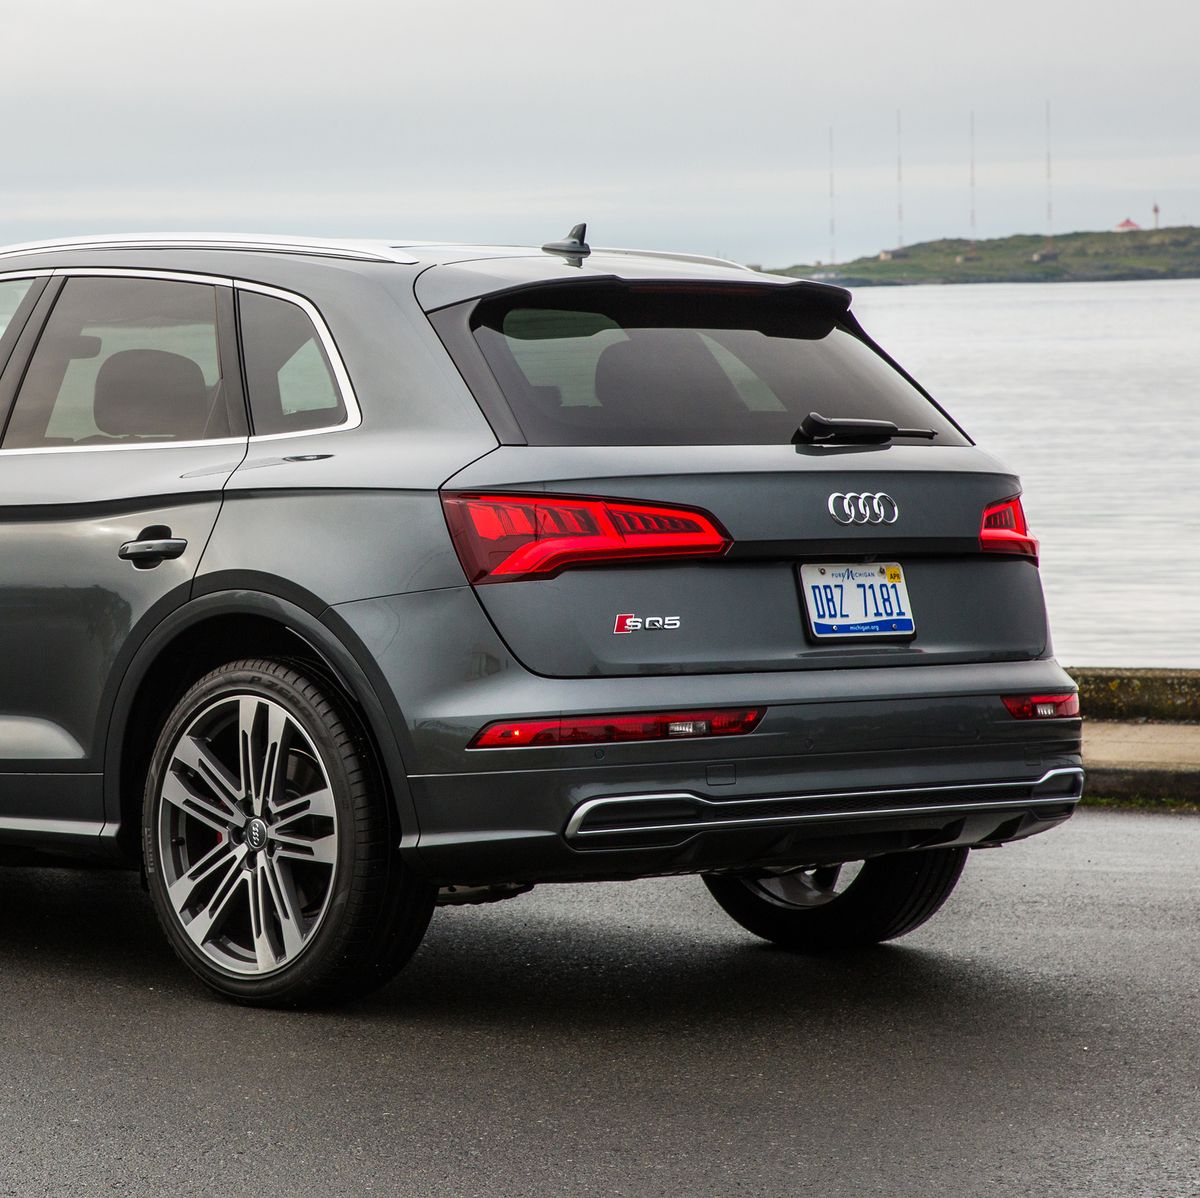 The Audi SQ5 Is What This Generation's Muscle Car Looks Like